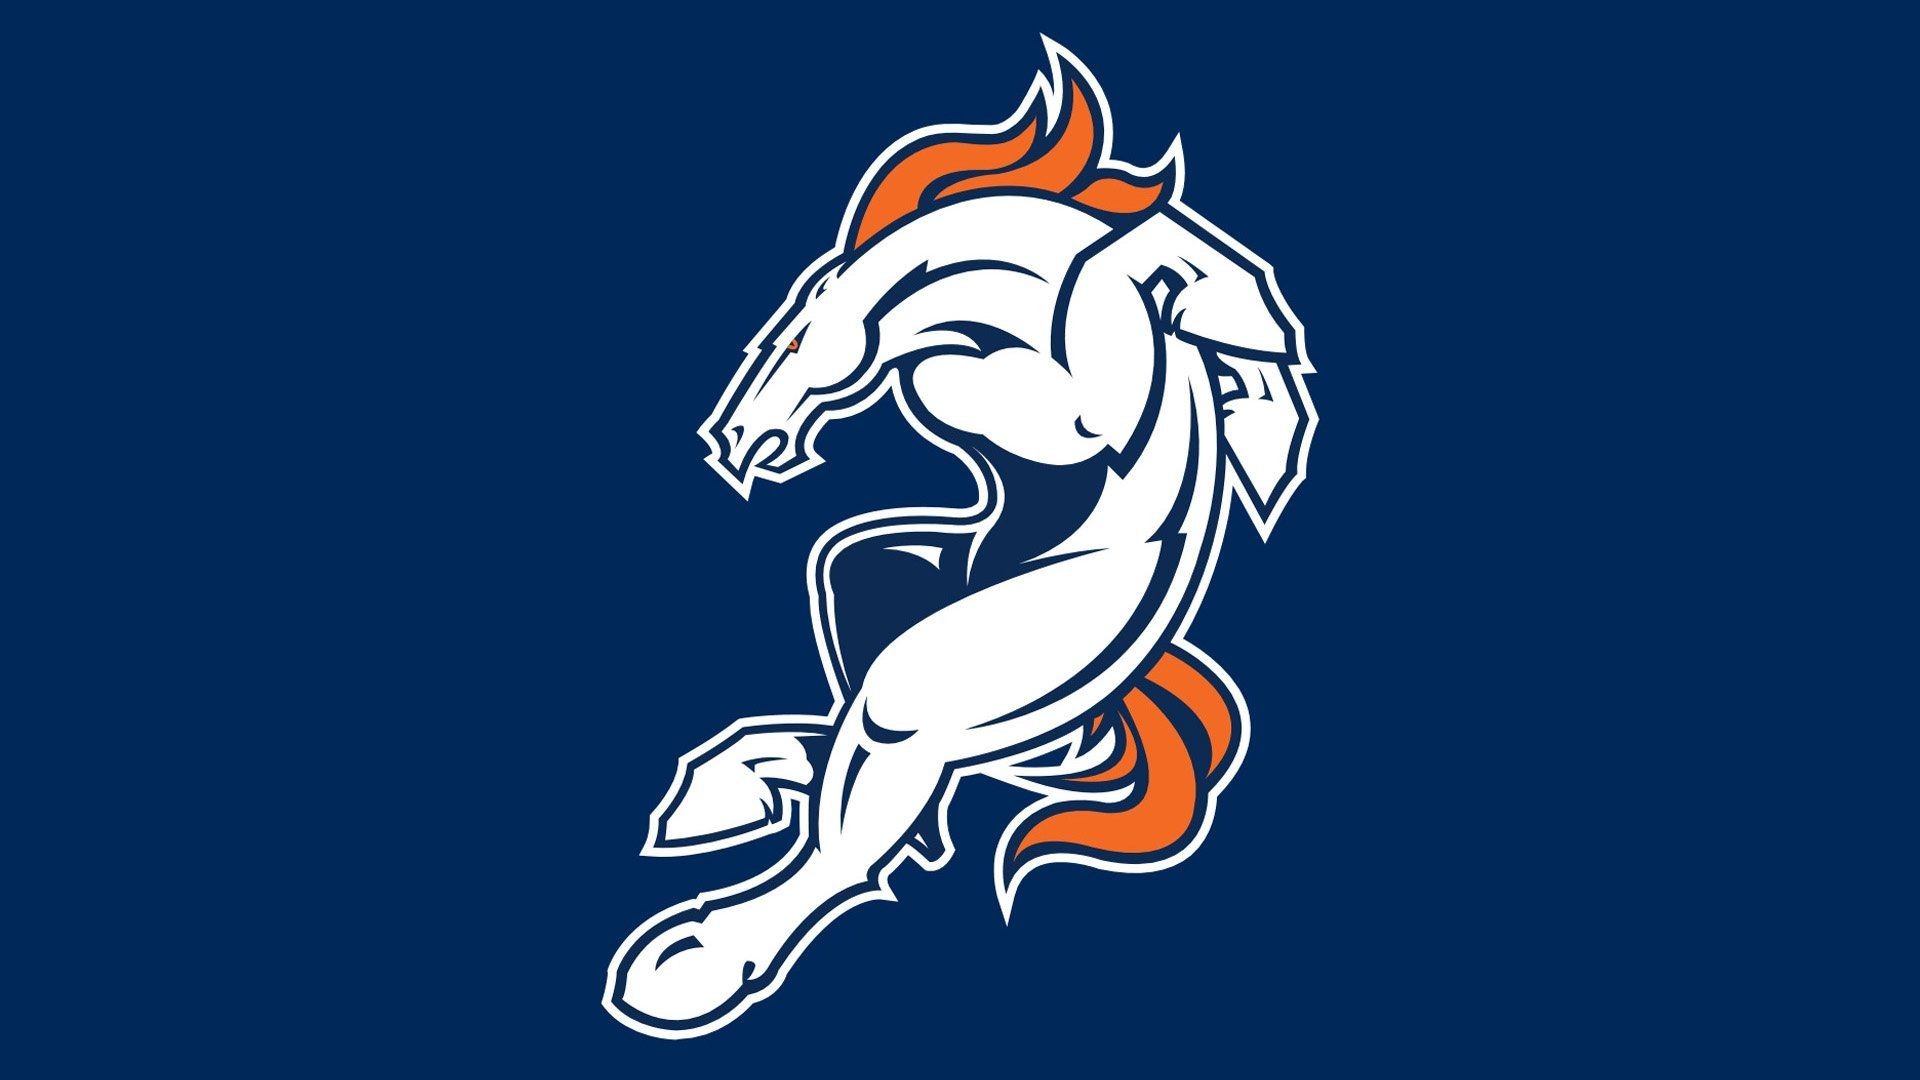 1920x1080 undefined Denver Broncos Wallpaper (49 Wallpapers) | Adorable Wallpapers